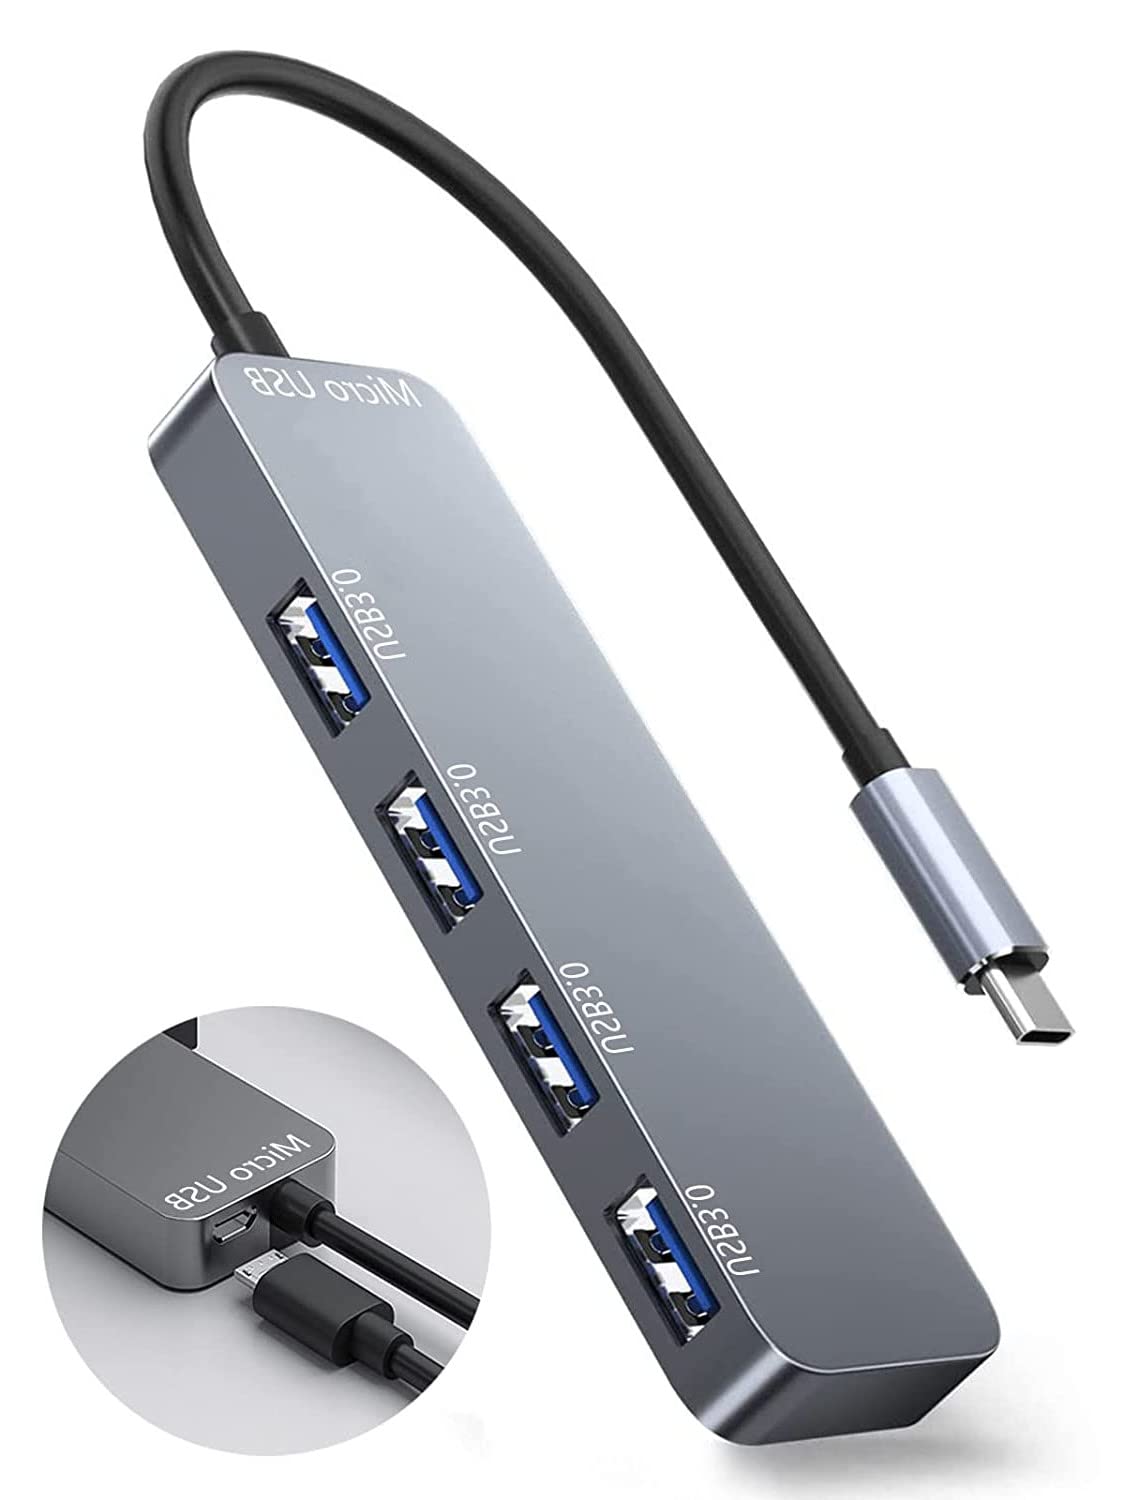 Verilux® 4 in 1 Multiport USB Hub with 4-Ports for Most USB C Devices,Faster Transmission,USB Hub for Home & Work